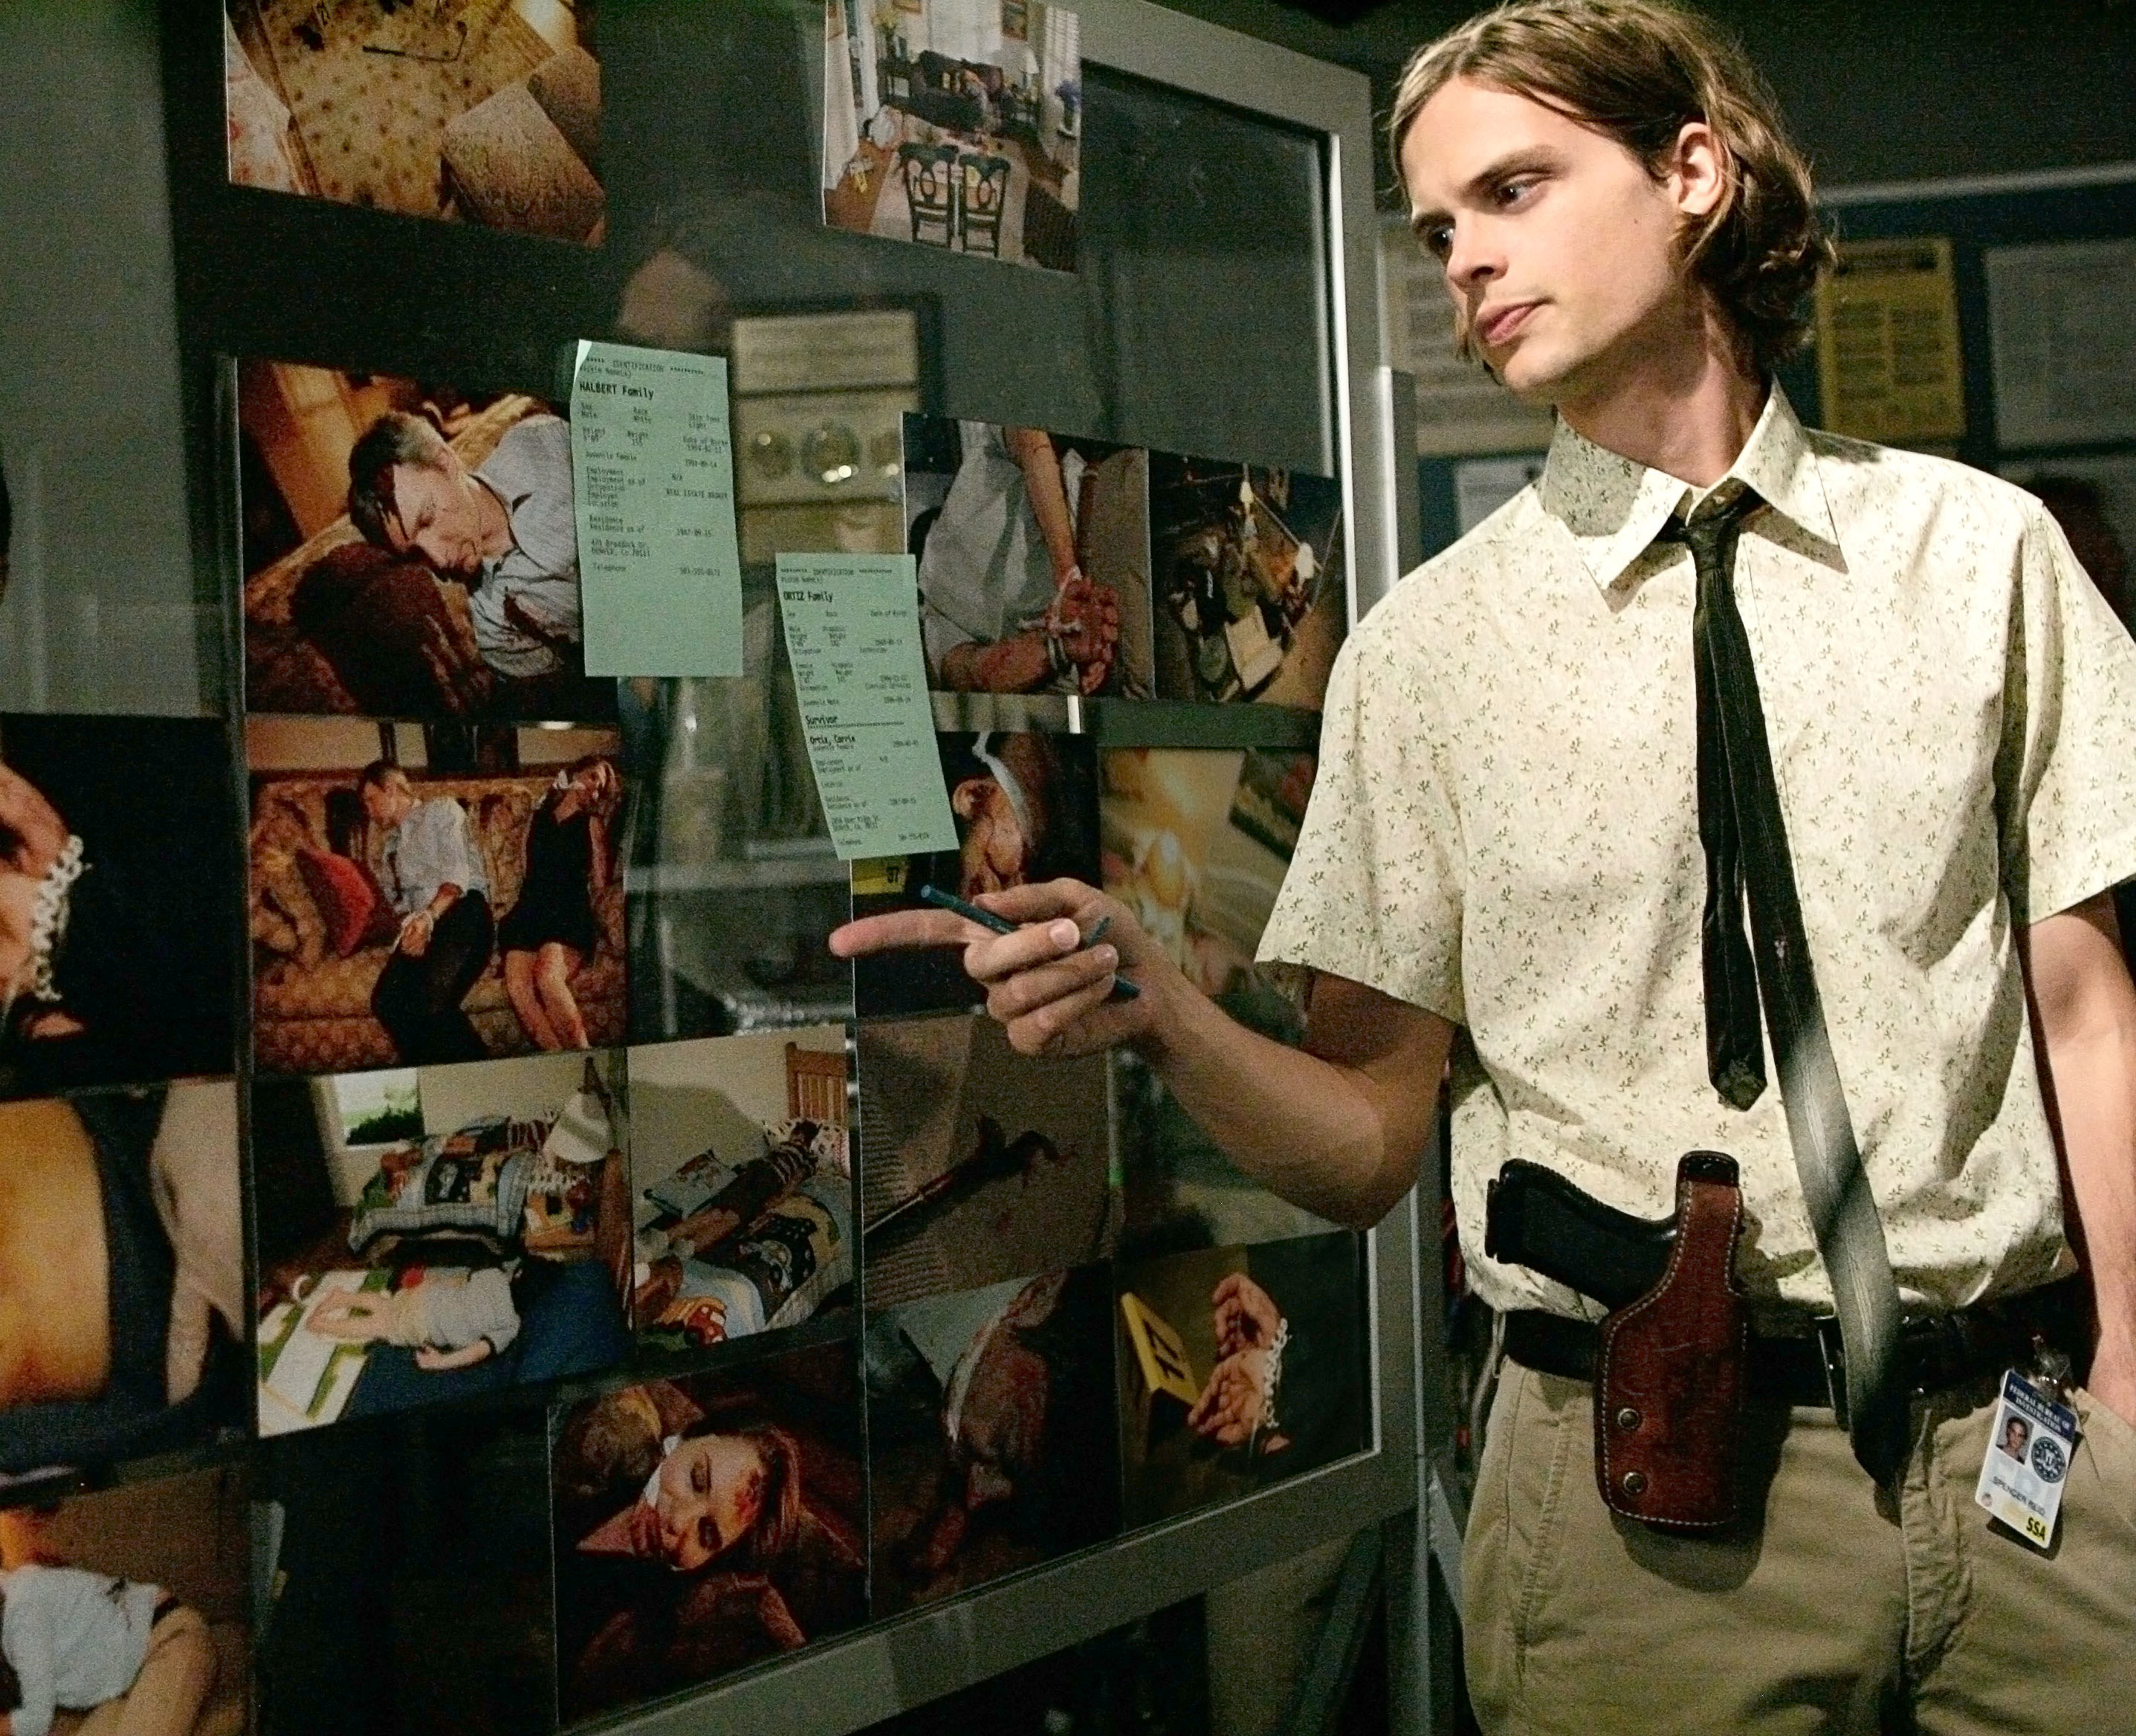 Matthew looking at a board filled with pictures during a scene of Criminal Minds